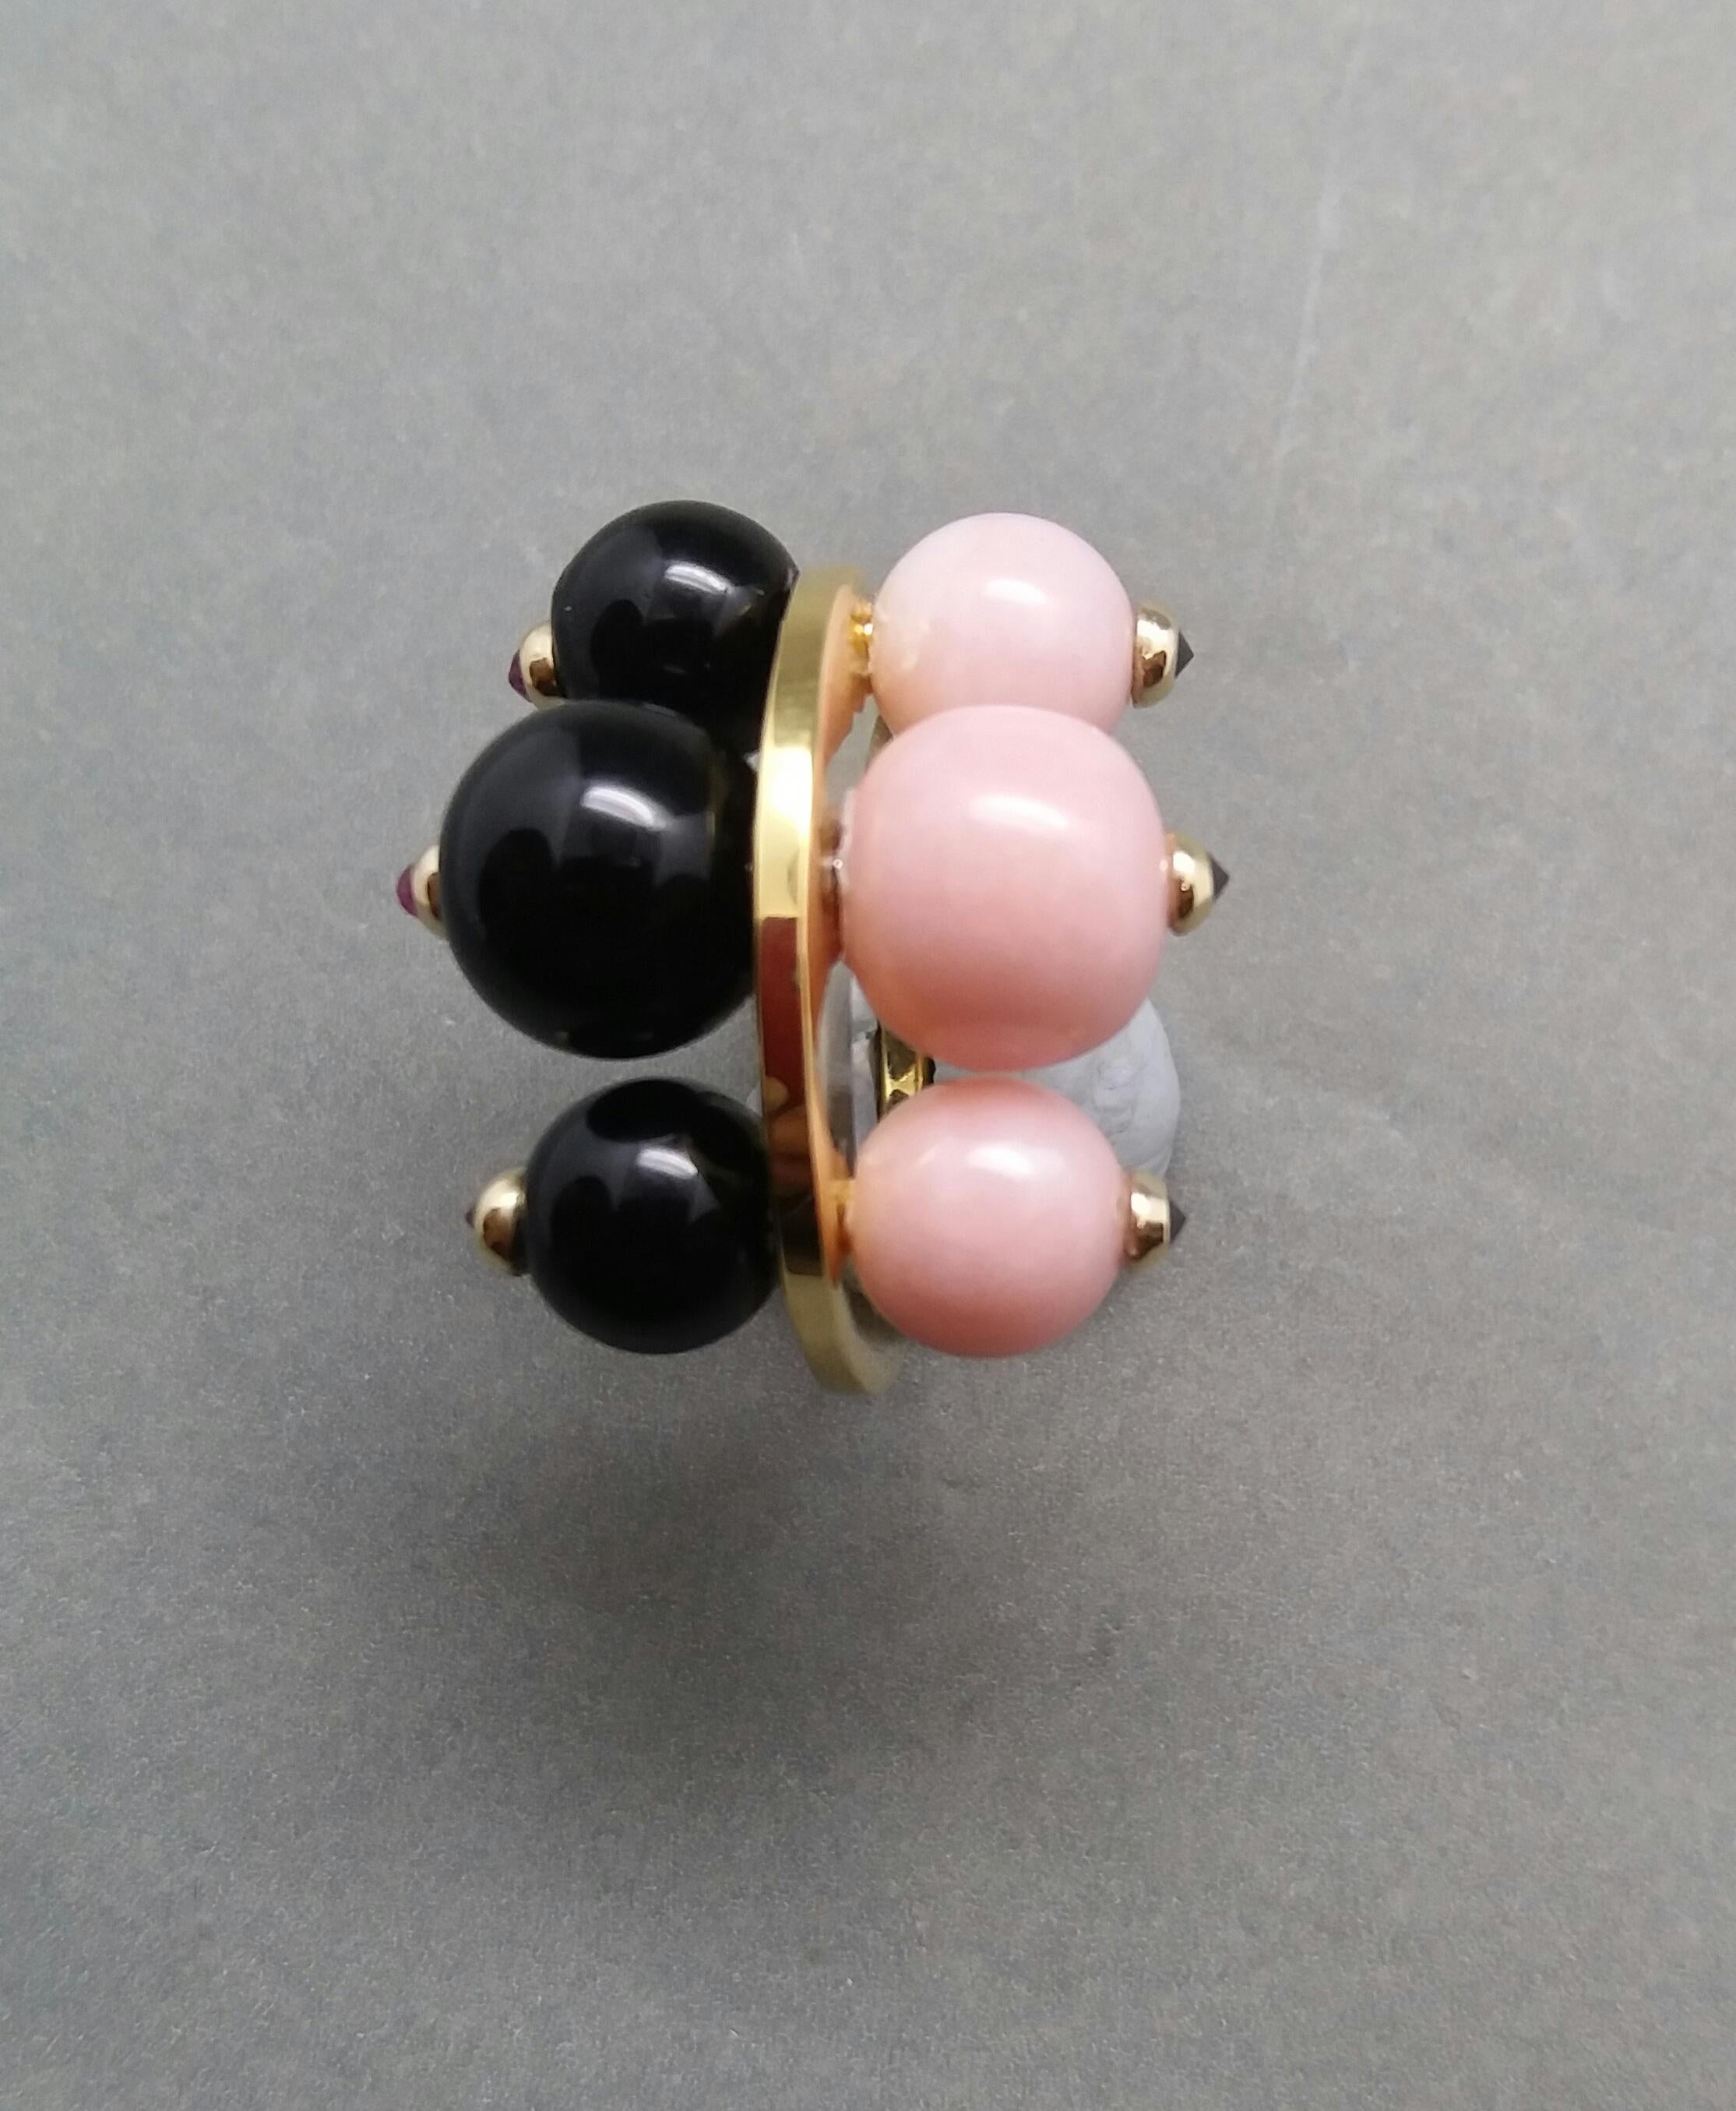 14 Karat Gold Black Onyx and Pink Opal Round Beads Rubies Black Diamonds Ring For Sale 3